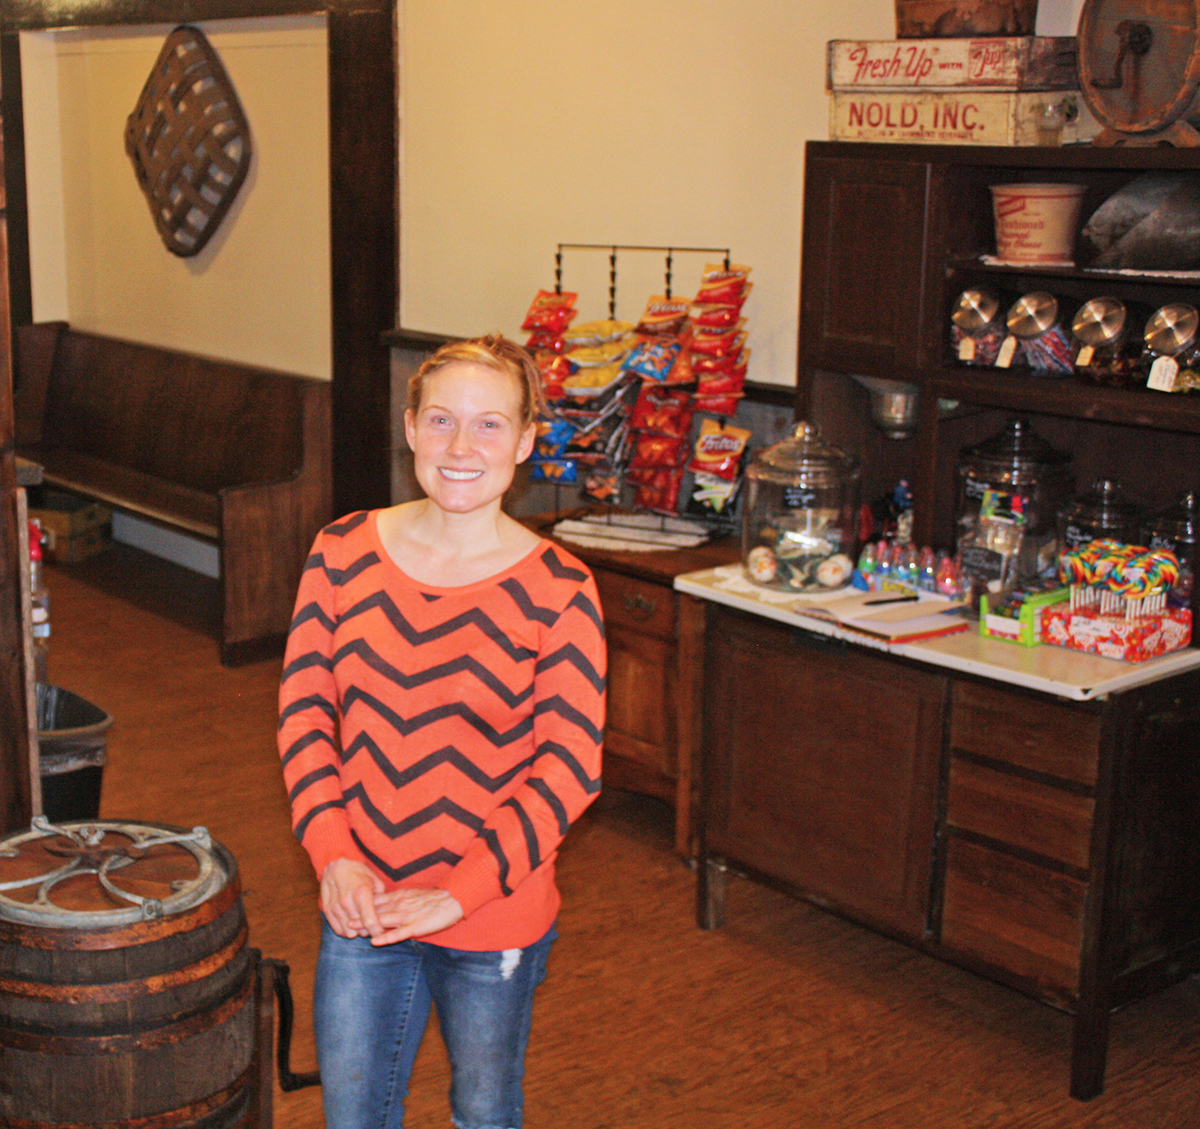 Amanda Jones has opened a business called The Butter Churn Bistro in Chamberlain, S.D. Photo by Wendy Royston/Dakotafire Media